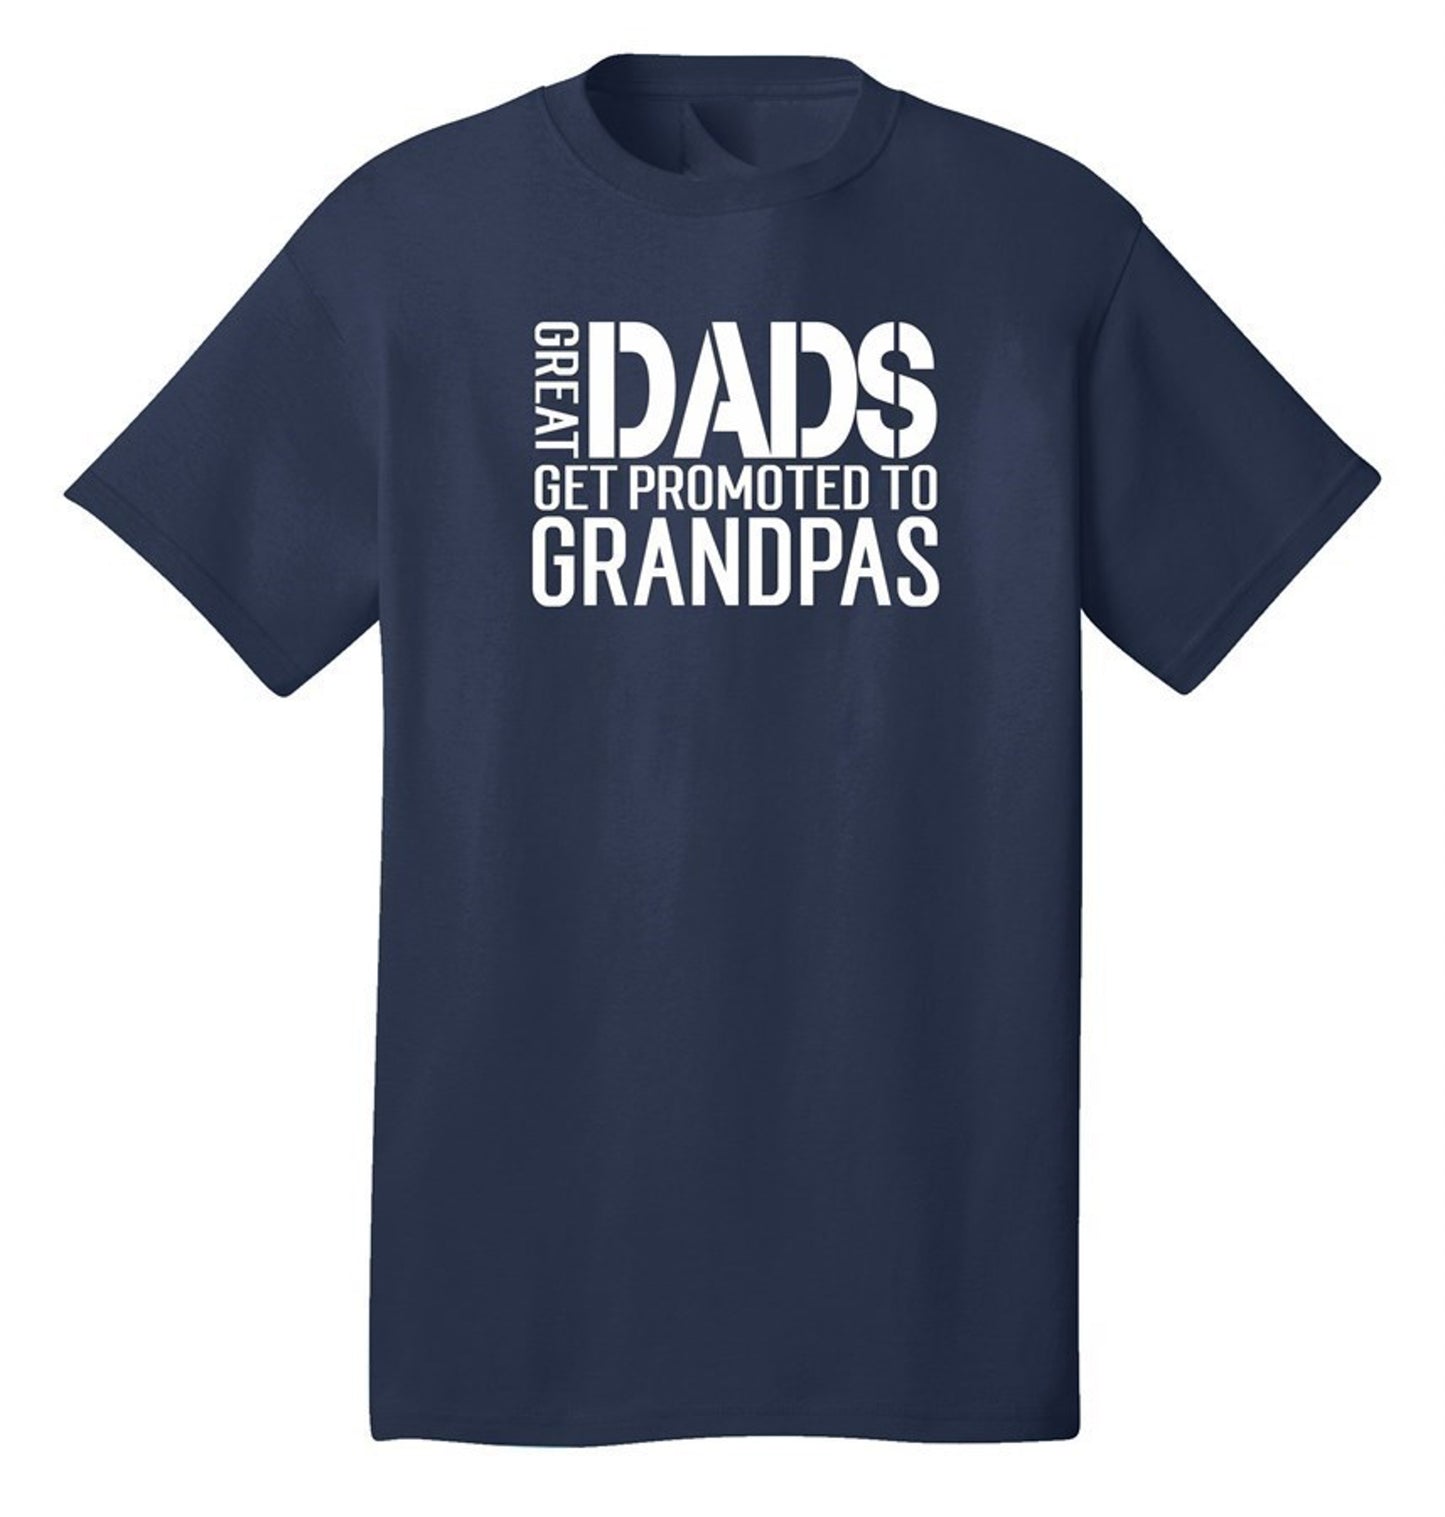 Great Dads Get Promoted To Grandpas Tee